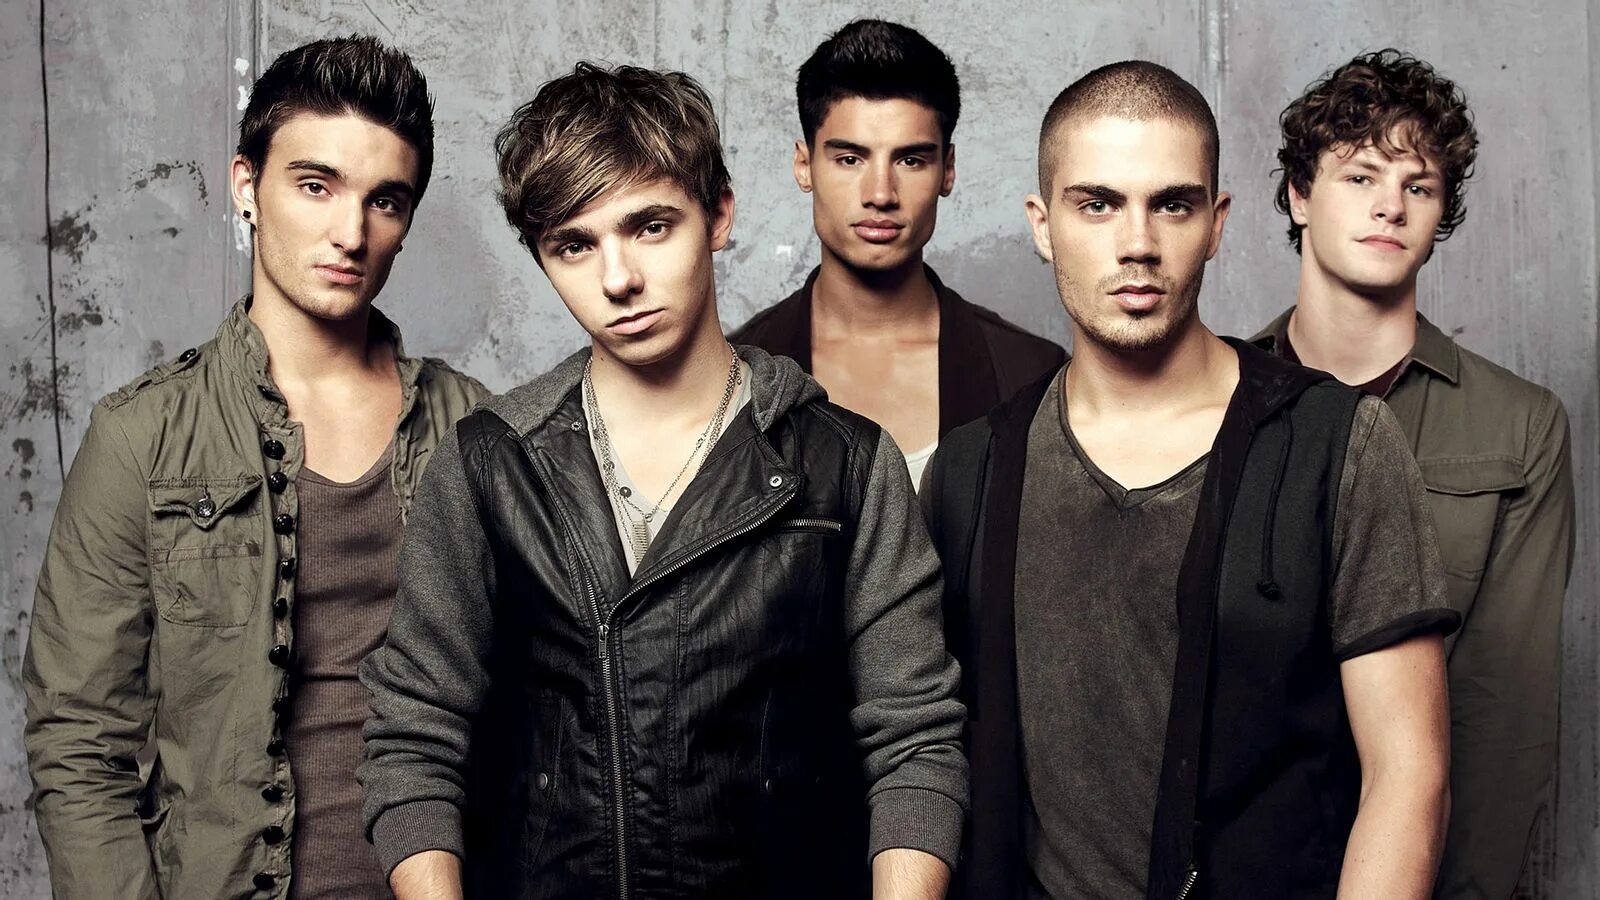 Группа the wanted. Want. Wanted 2022. Группа the wanted 2019. Группа мальчики и парни